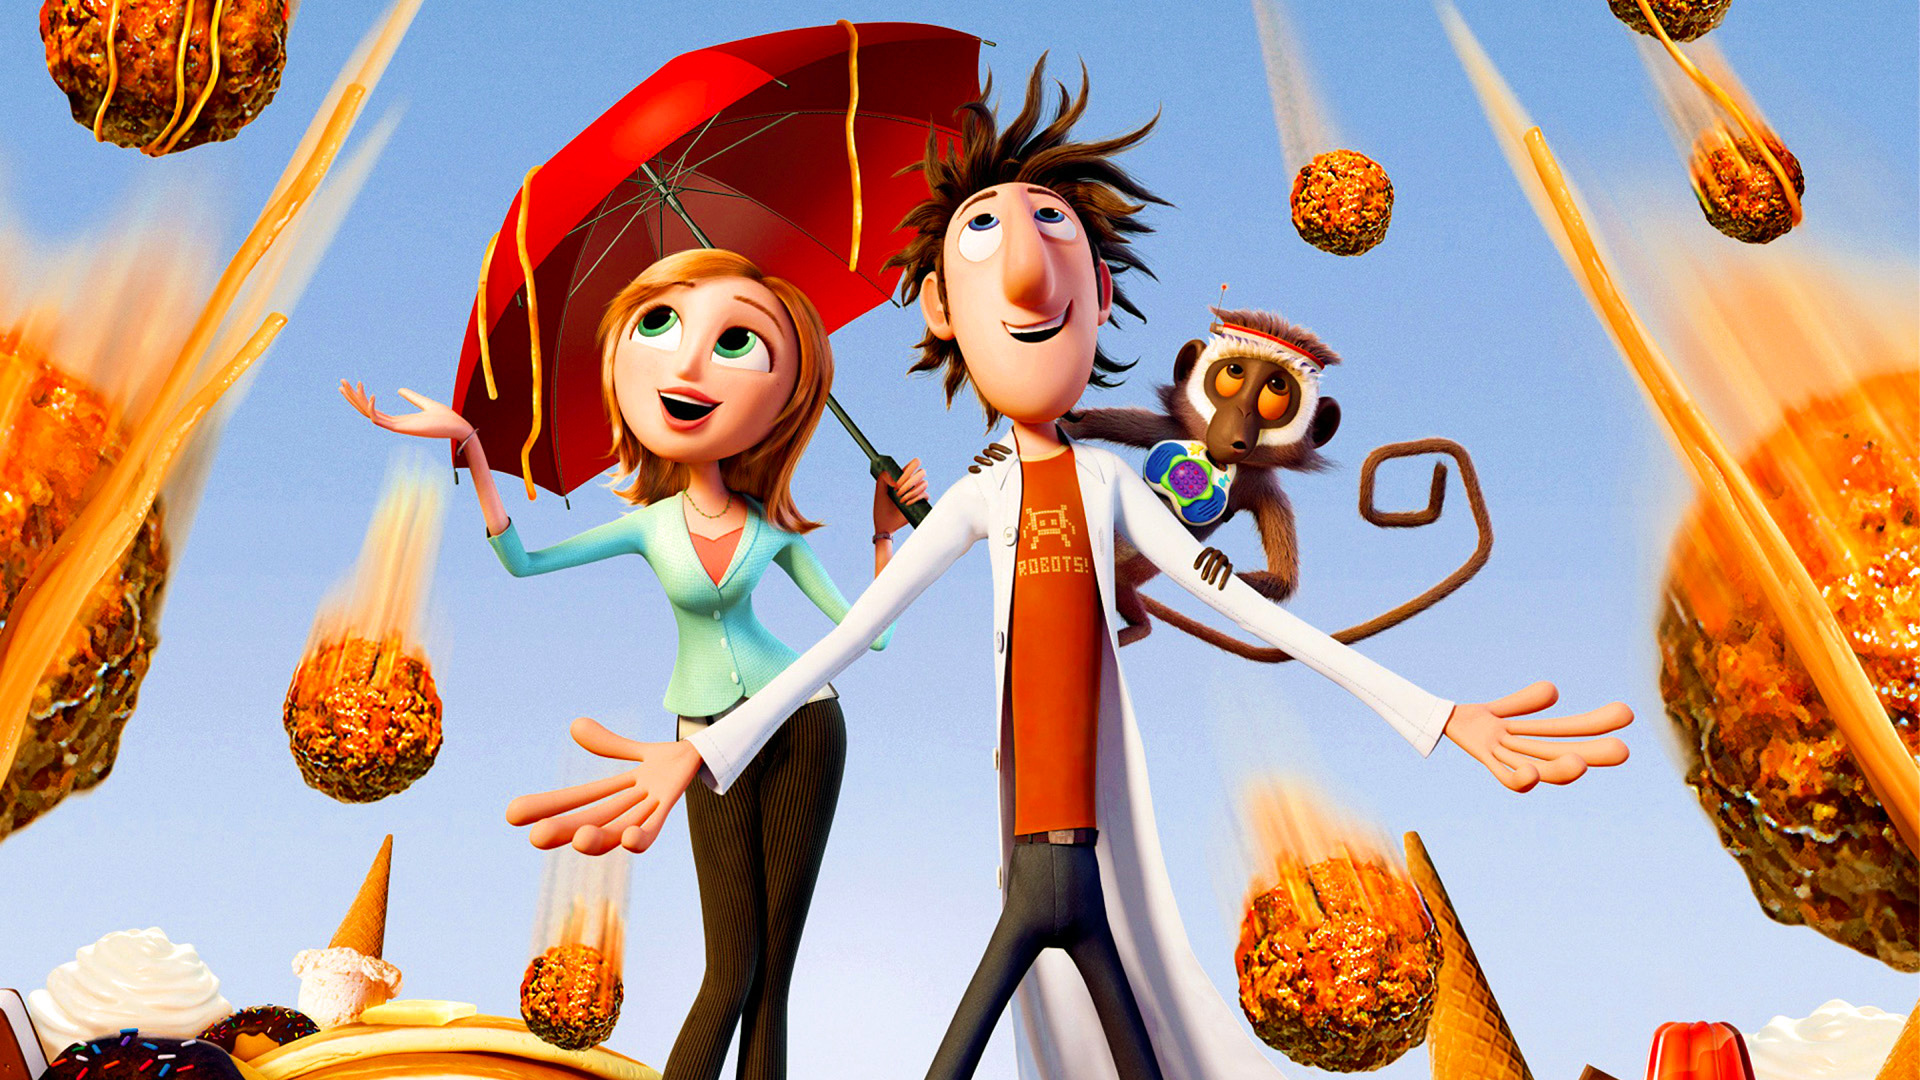 Movie Cloudy With A Chance Of Meatballs 1920x1080